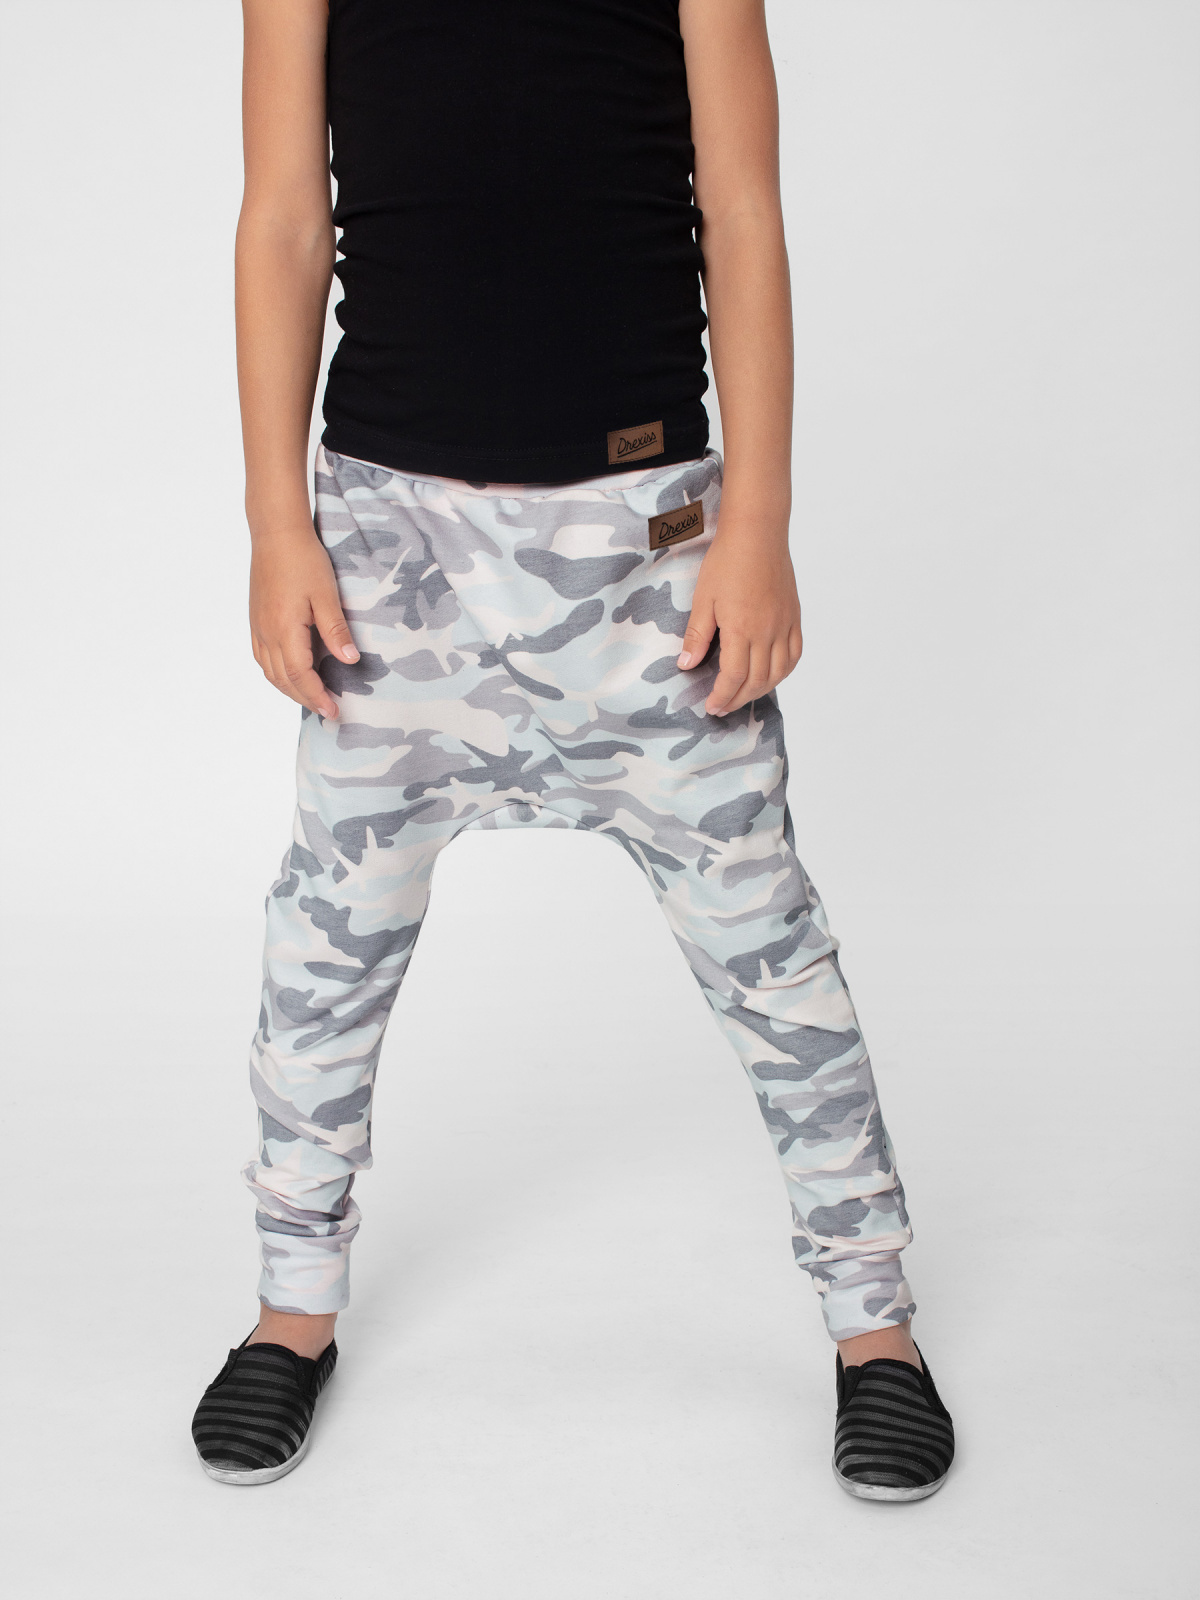 Drexiss baggy ARMY GREY Velikost: vel. 80-86